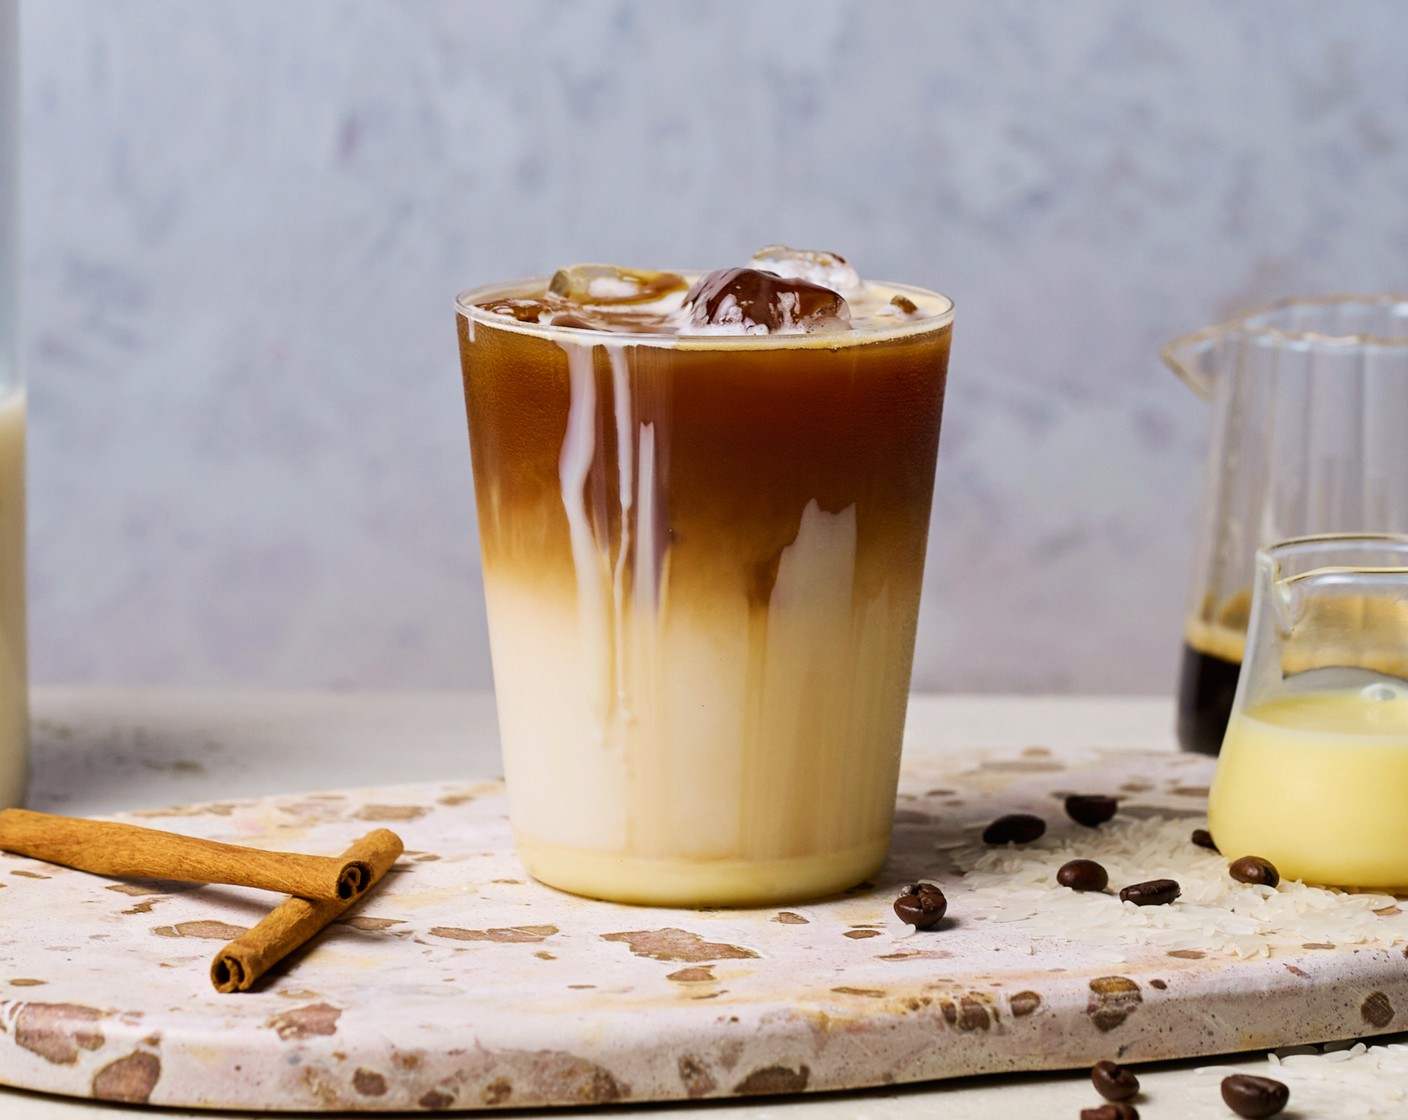 Iced Horchata Coffee (Dirty Horchata)